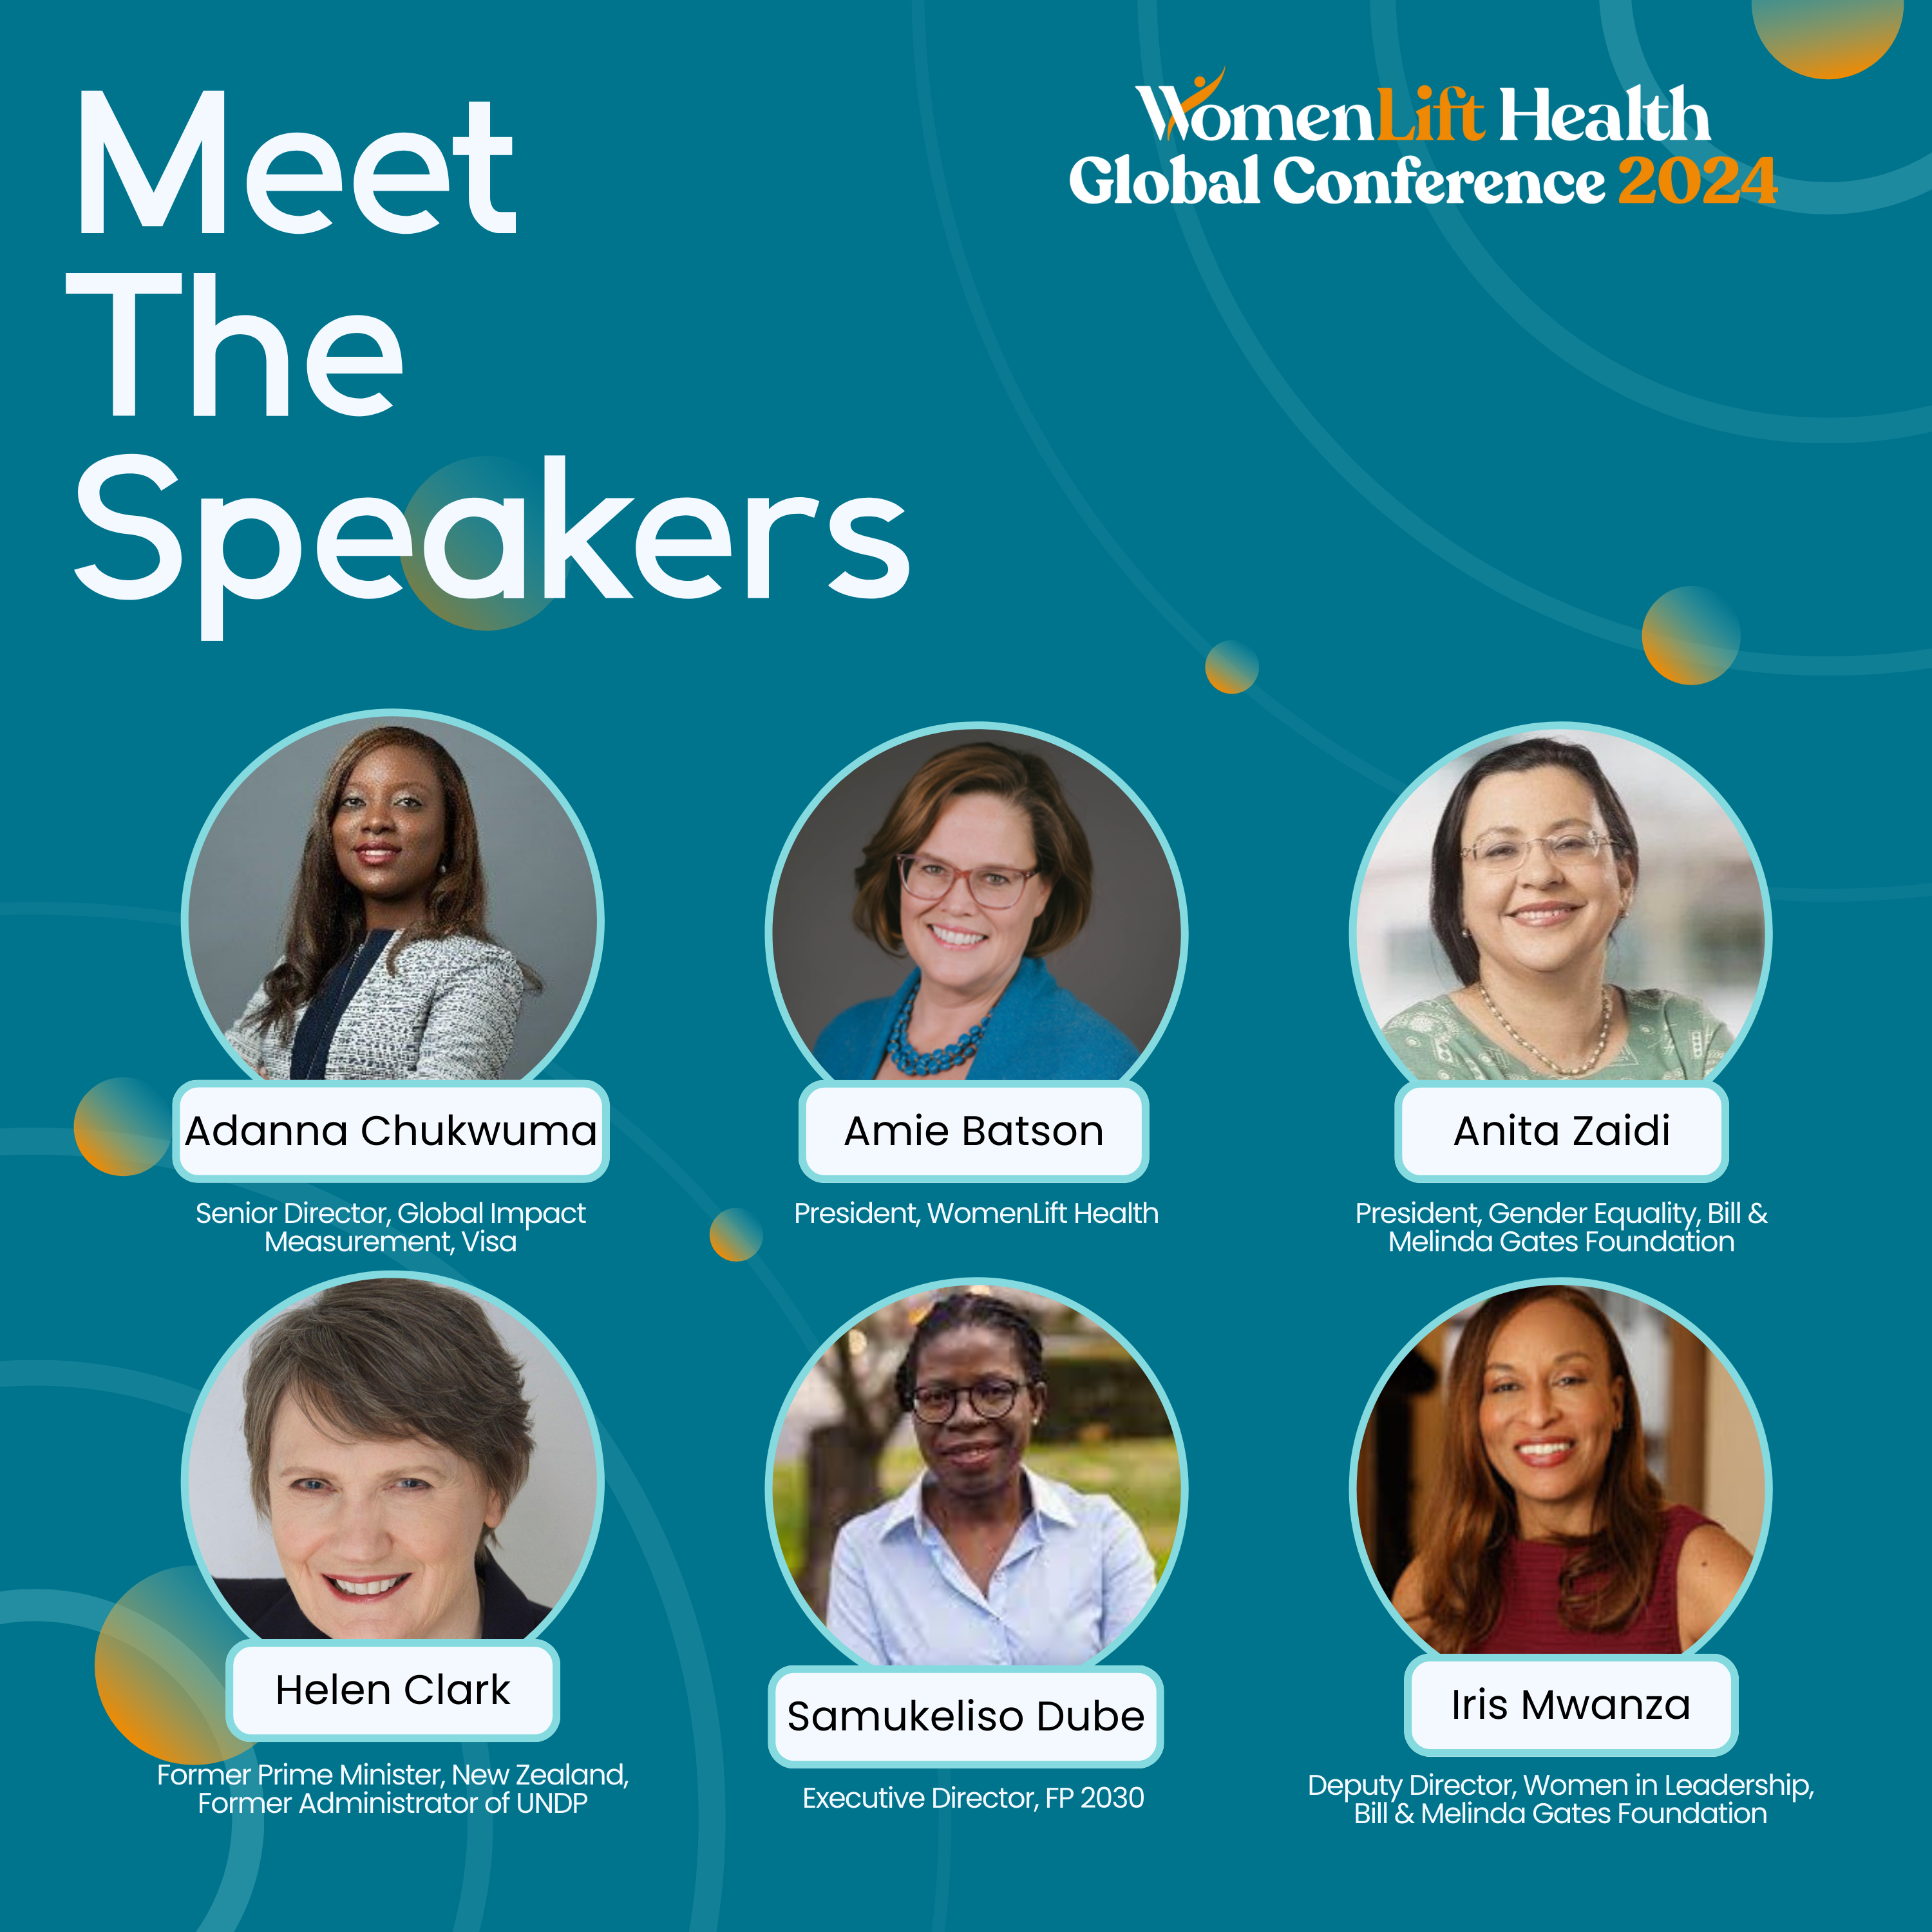 Meet the Speakers of the WomenLift Health Global Conference 2024